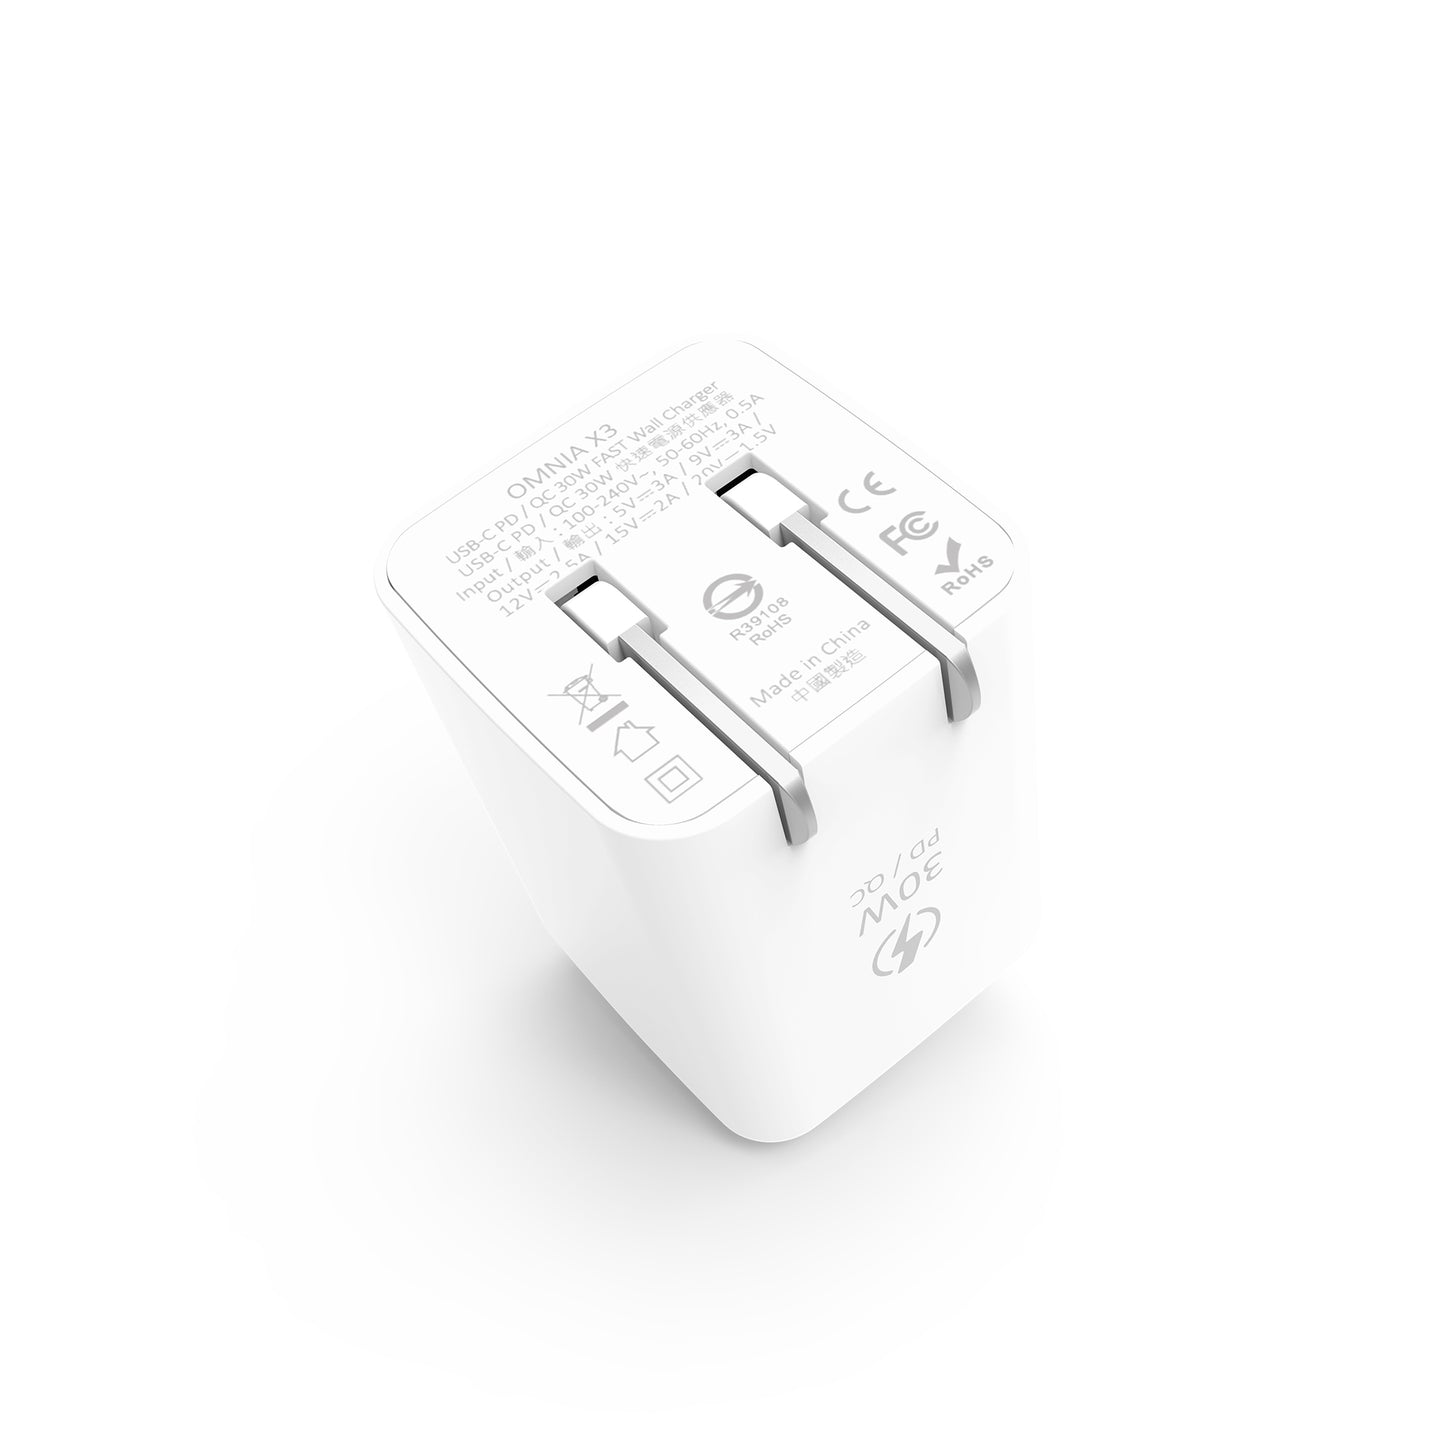 ADAM ELEMENTS Omnia X3 30W USB-C PD Wall Charger - White